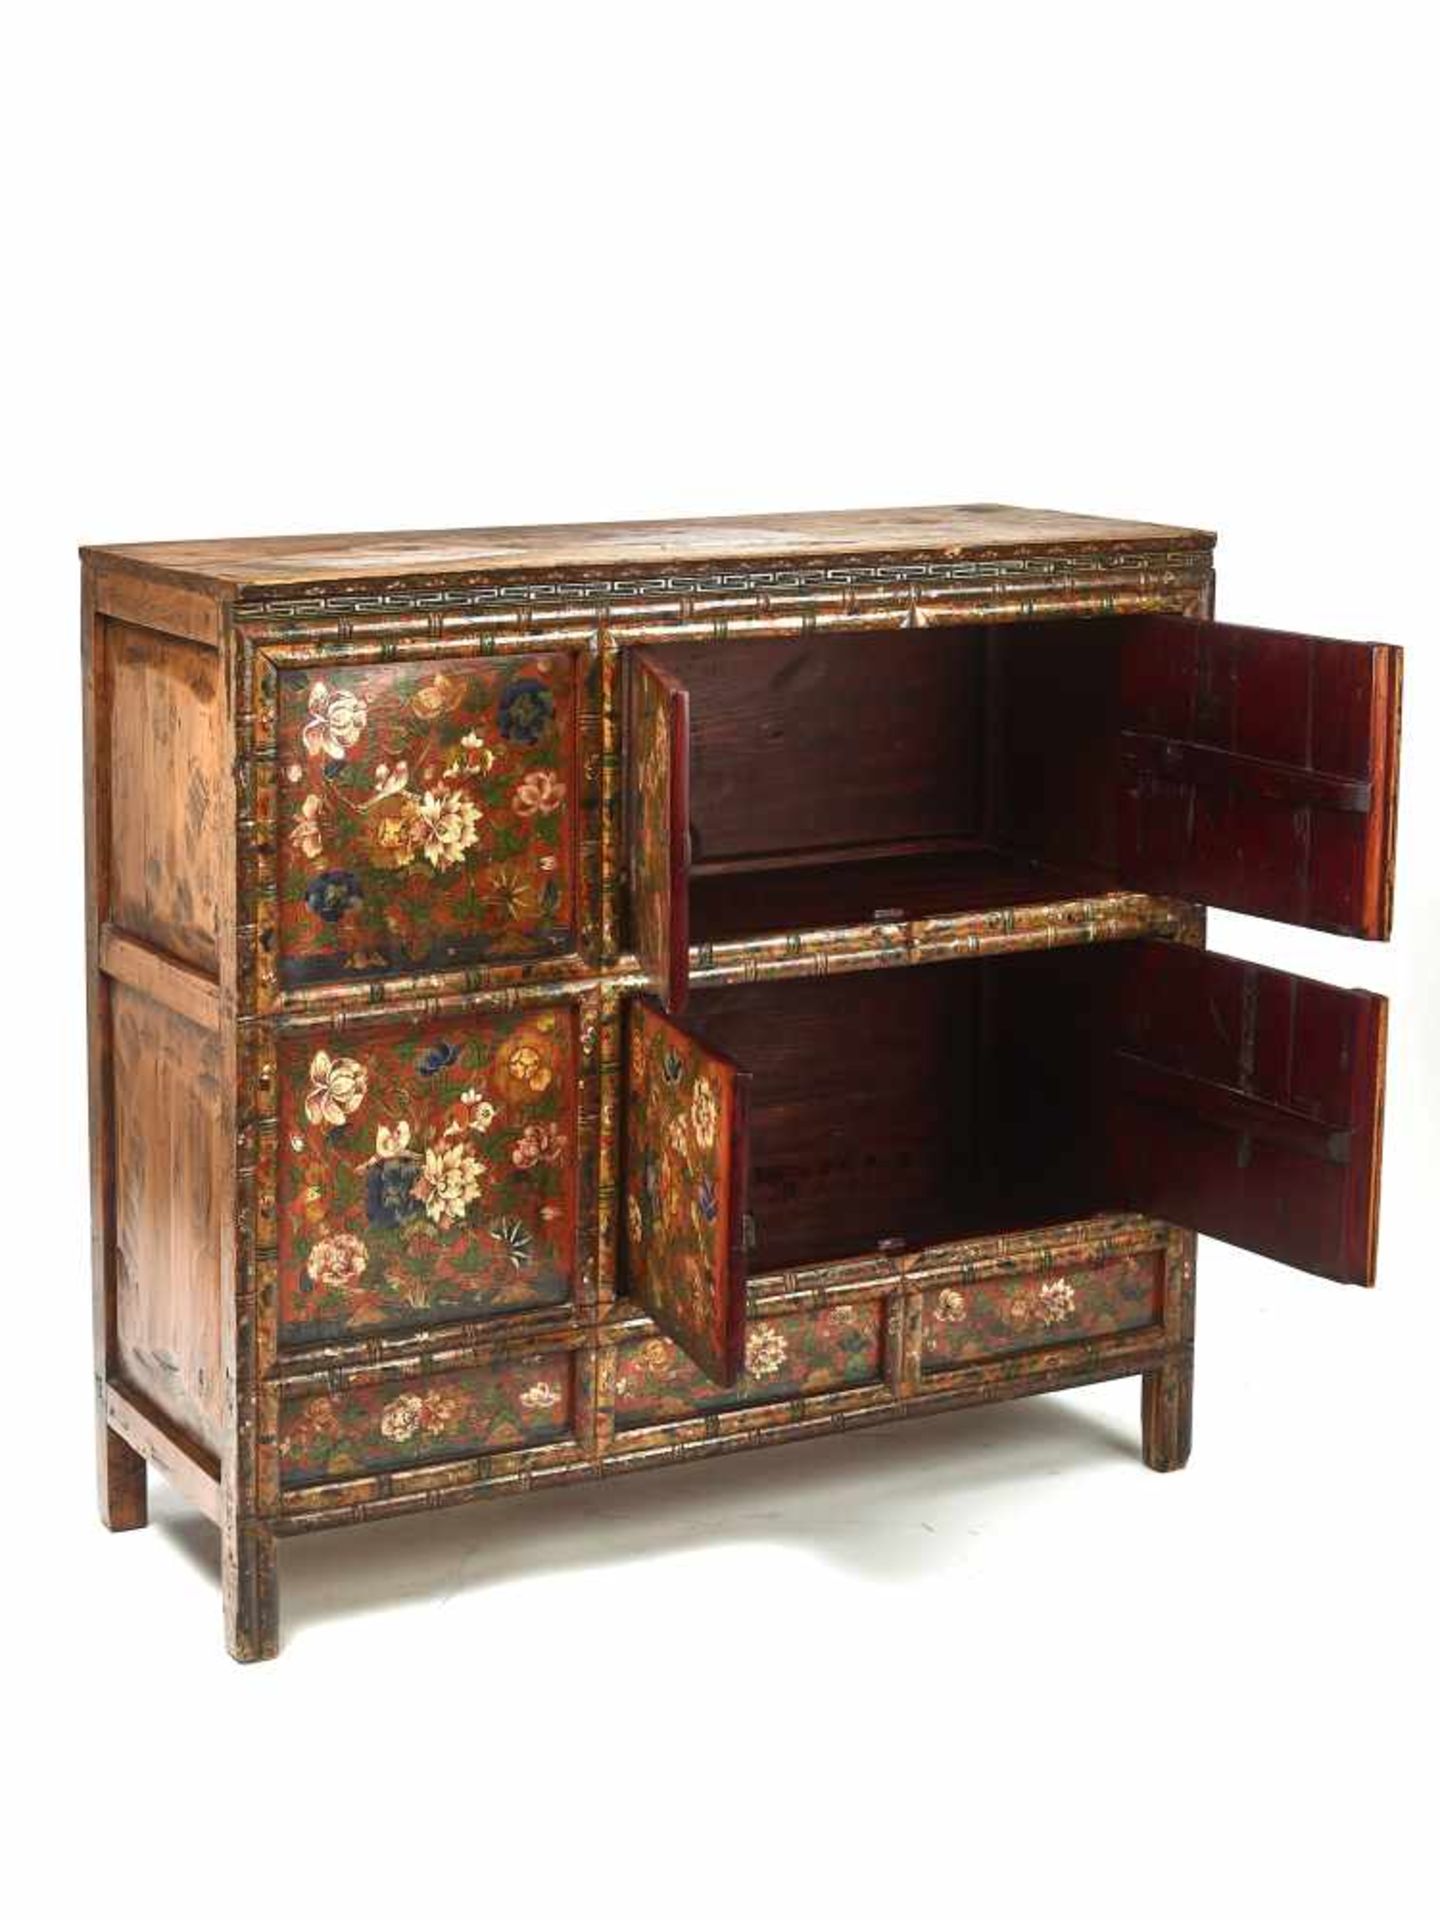 A RARE AND LARGE TIBETAN LACQUERED HARDWOOD CABINET, 19TH CENTURYNicely painted original lacquer - Image 3 of 5